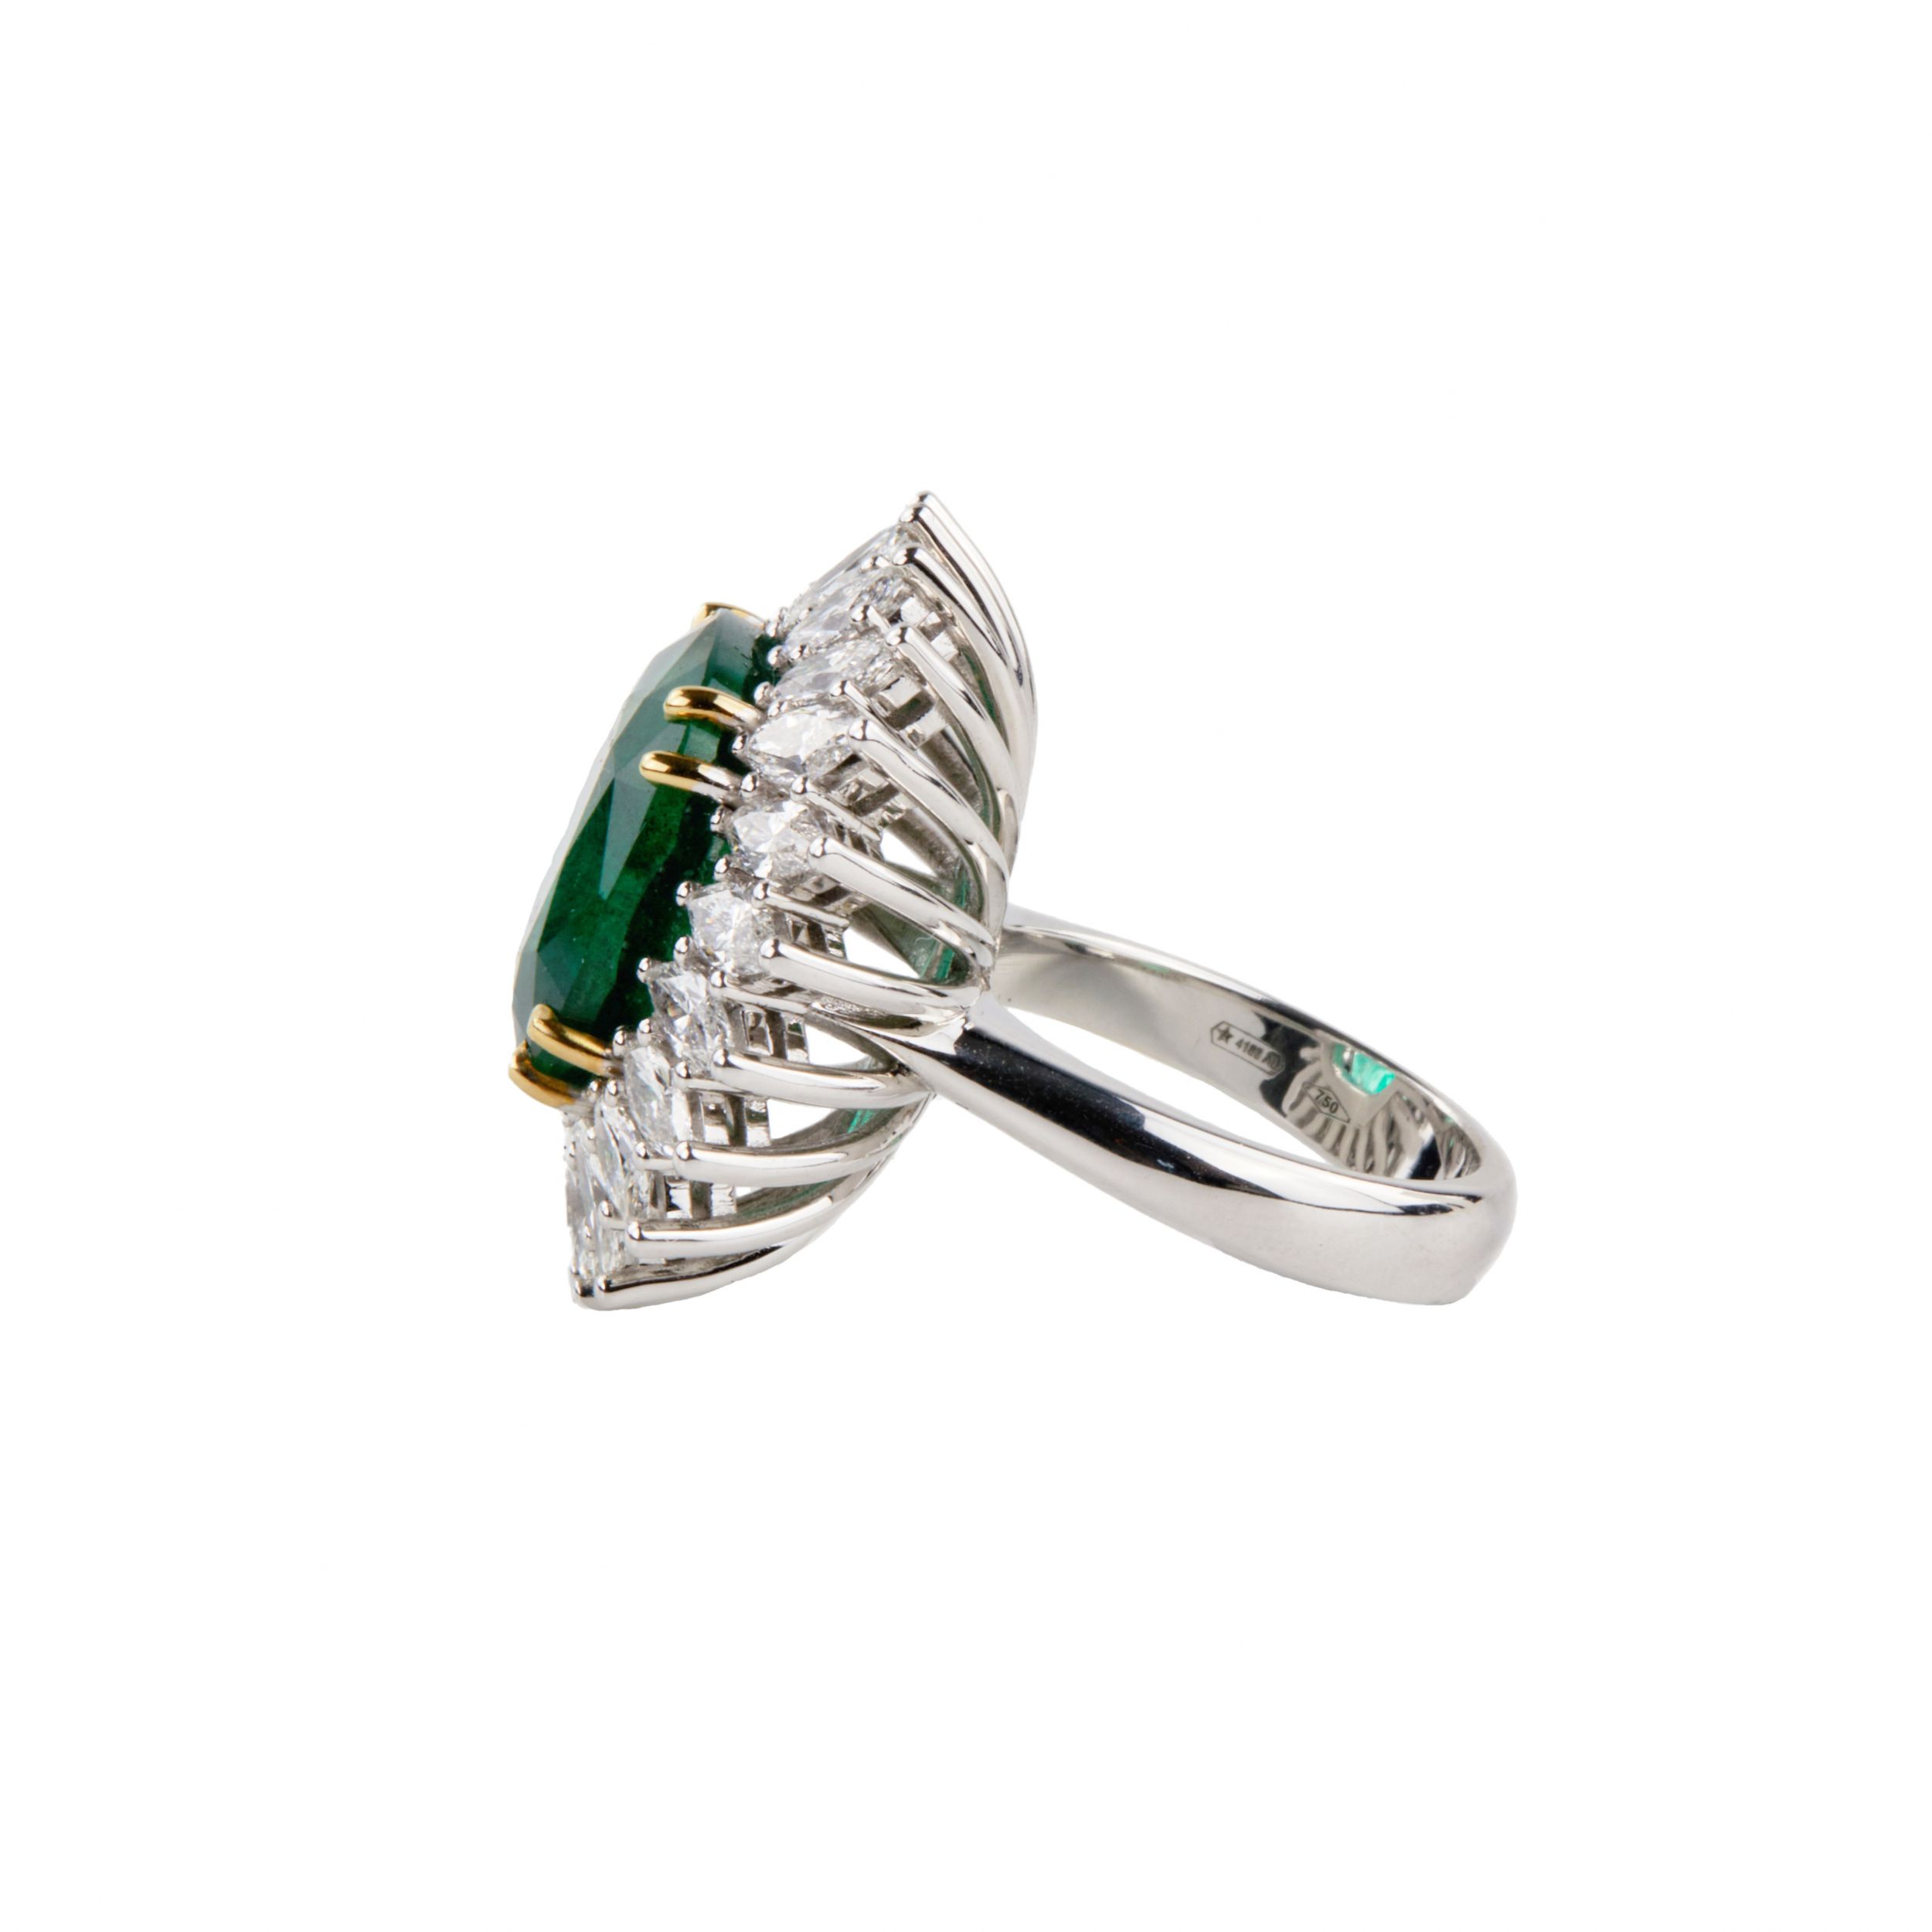 White gold ring with emerald and diamonds. - Image 4 of 7